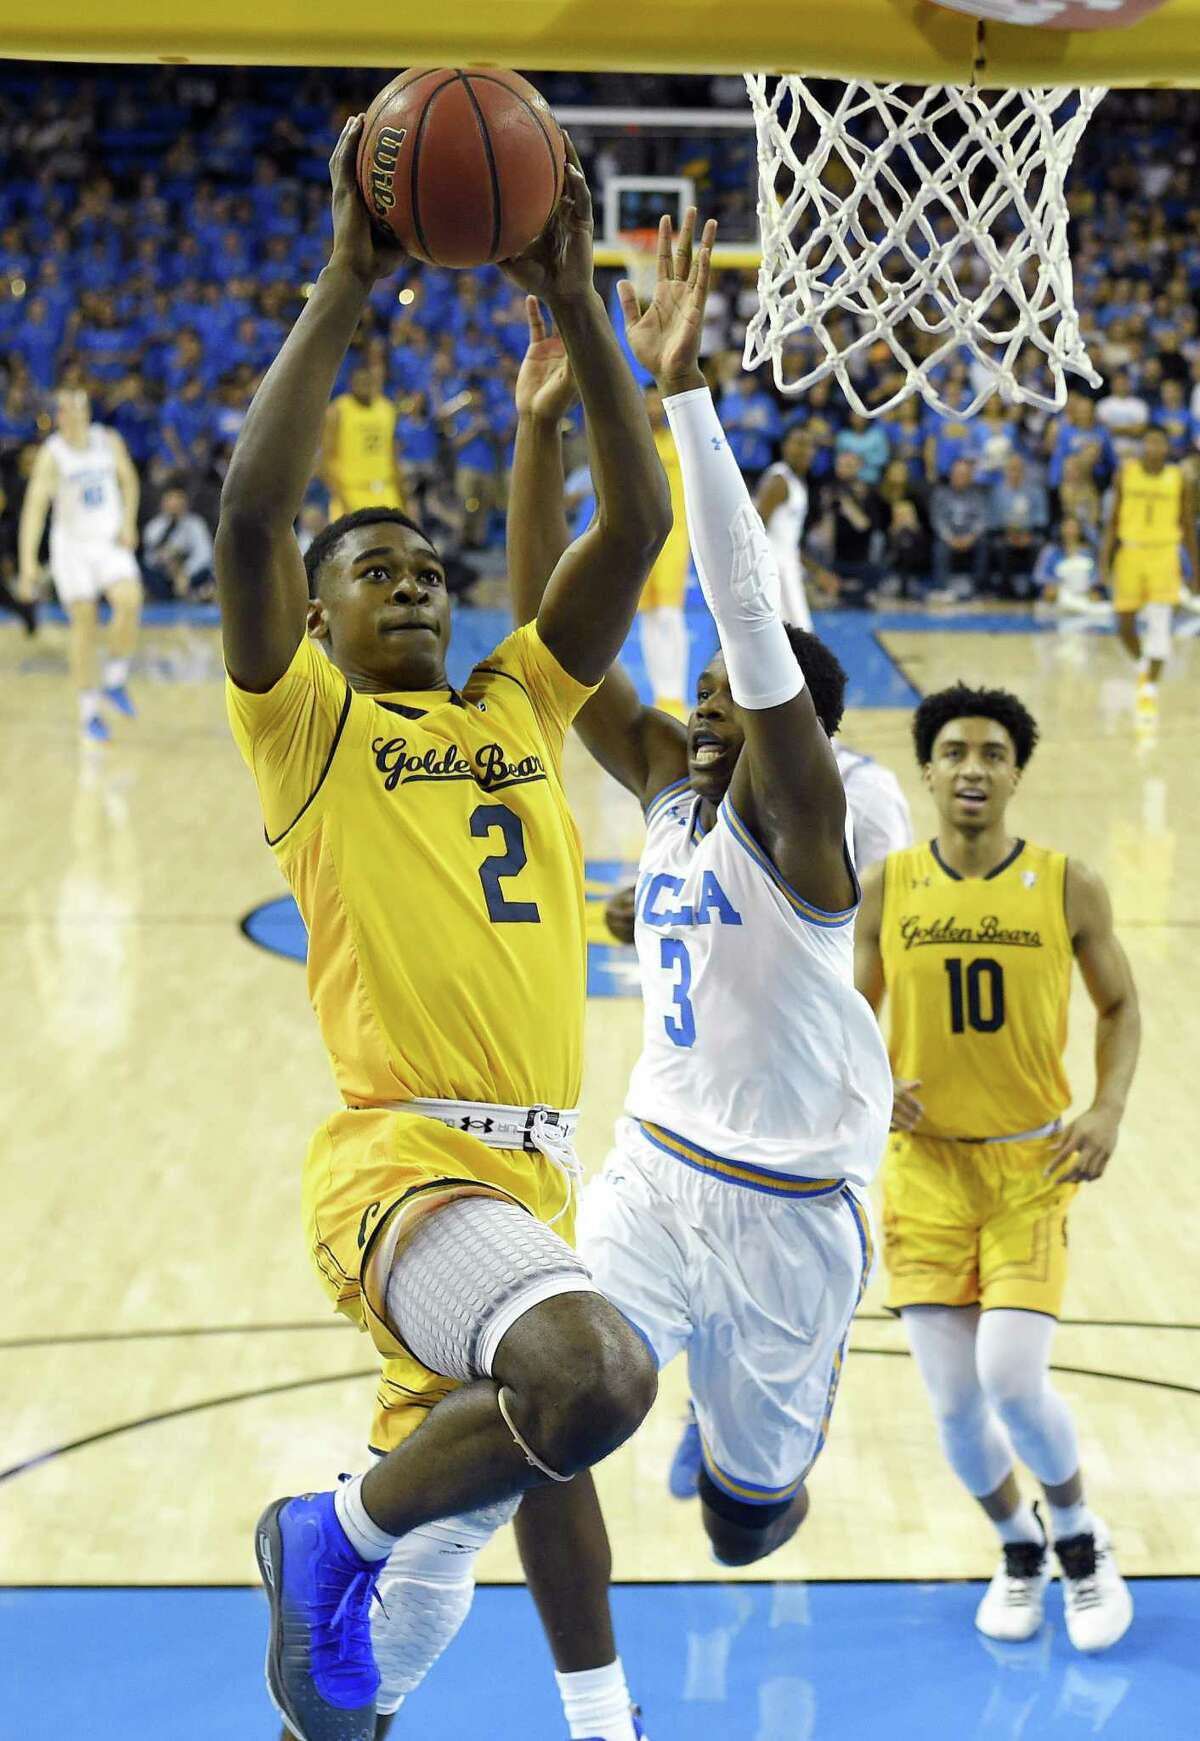 California guard Juhwan Harris-Dyson, left, shoots as UCLA guard Aaron Holiday, center, defends and California forward Justice Sueing watches during the first half of an NCAA college basketball game Thursday, Jan. 25, 2018, in Los Angeles. (AP Photo/Mark J. Terrill)